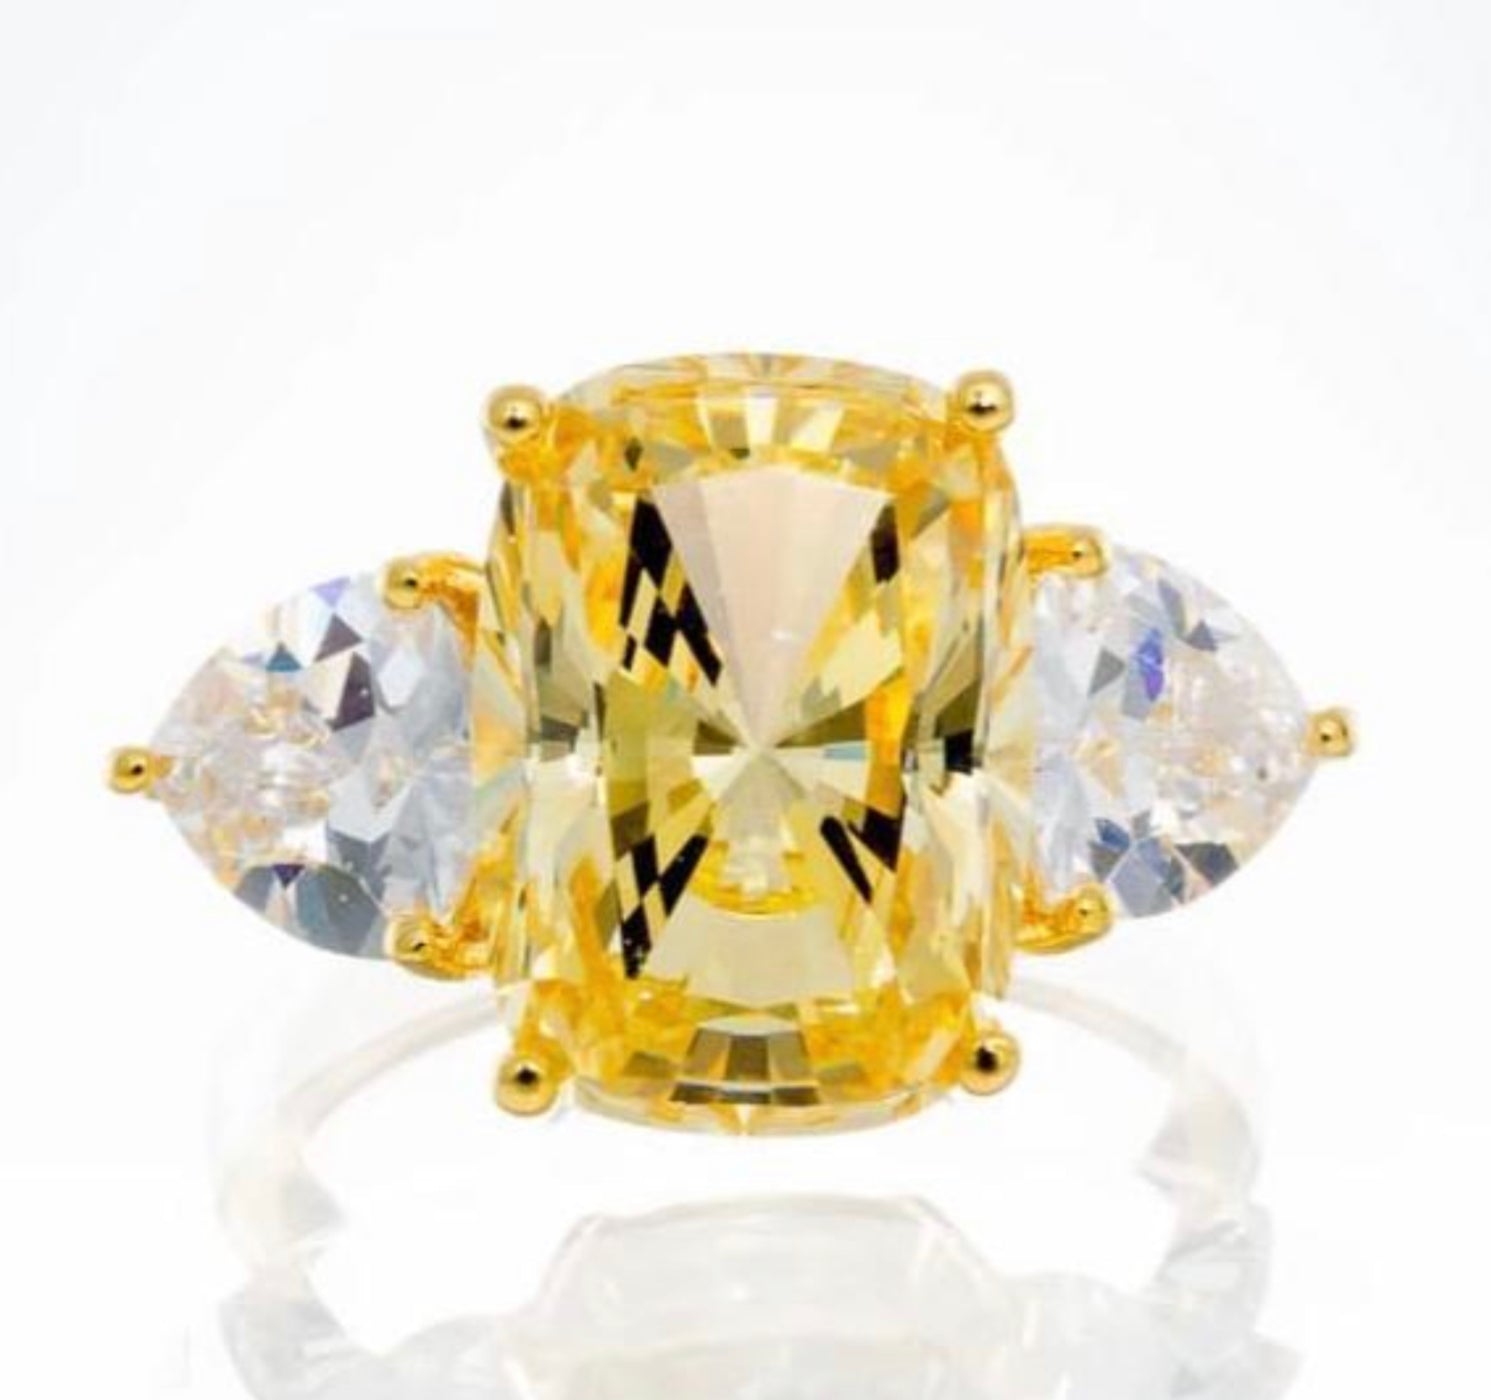 Wholesale 9 Carat Chunky Cushion Cut Canary CZ Engagement Ring In Yellow Gold Plated Sterling Silver - Boutique Pavè